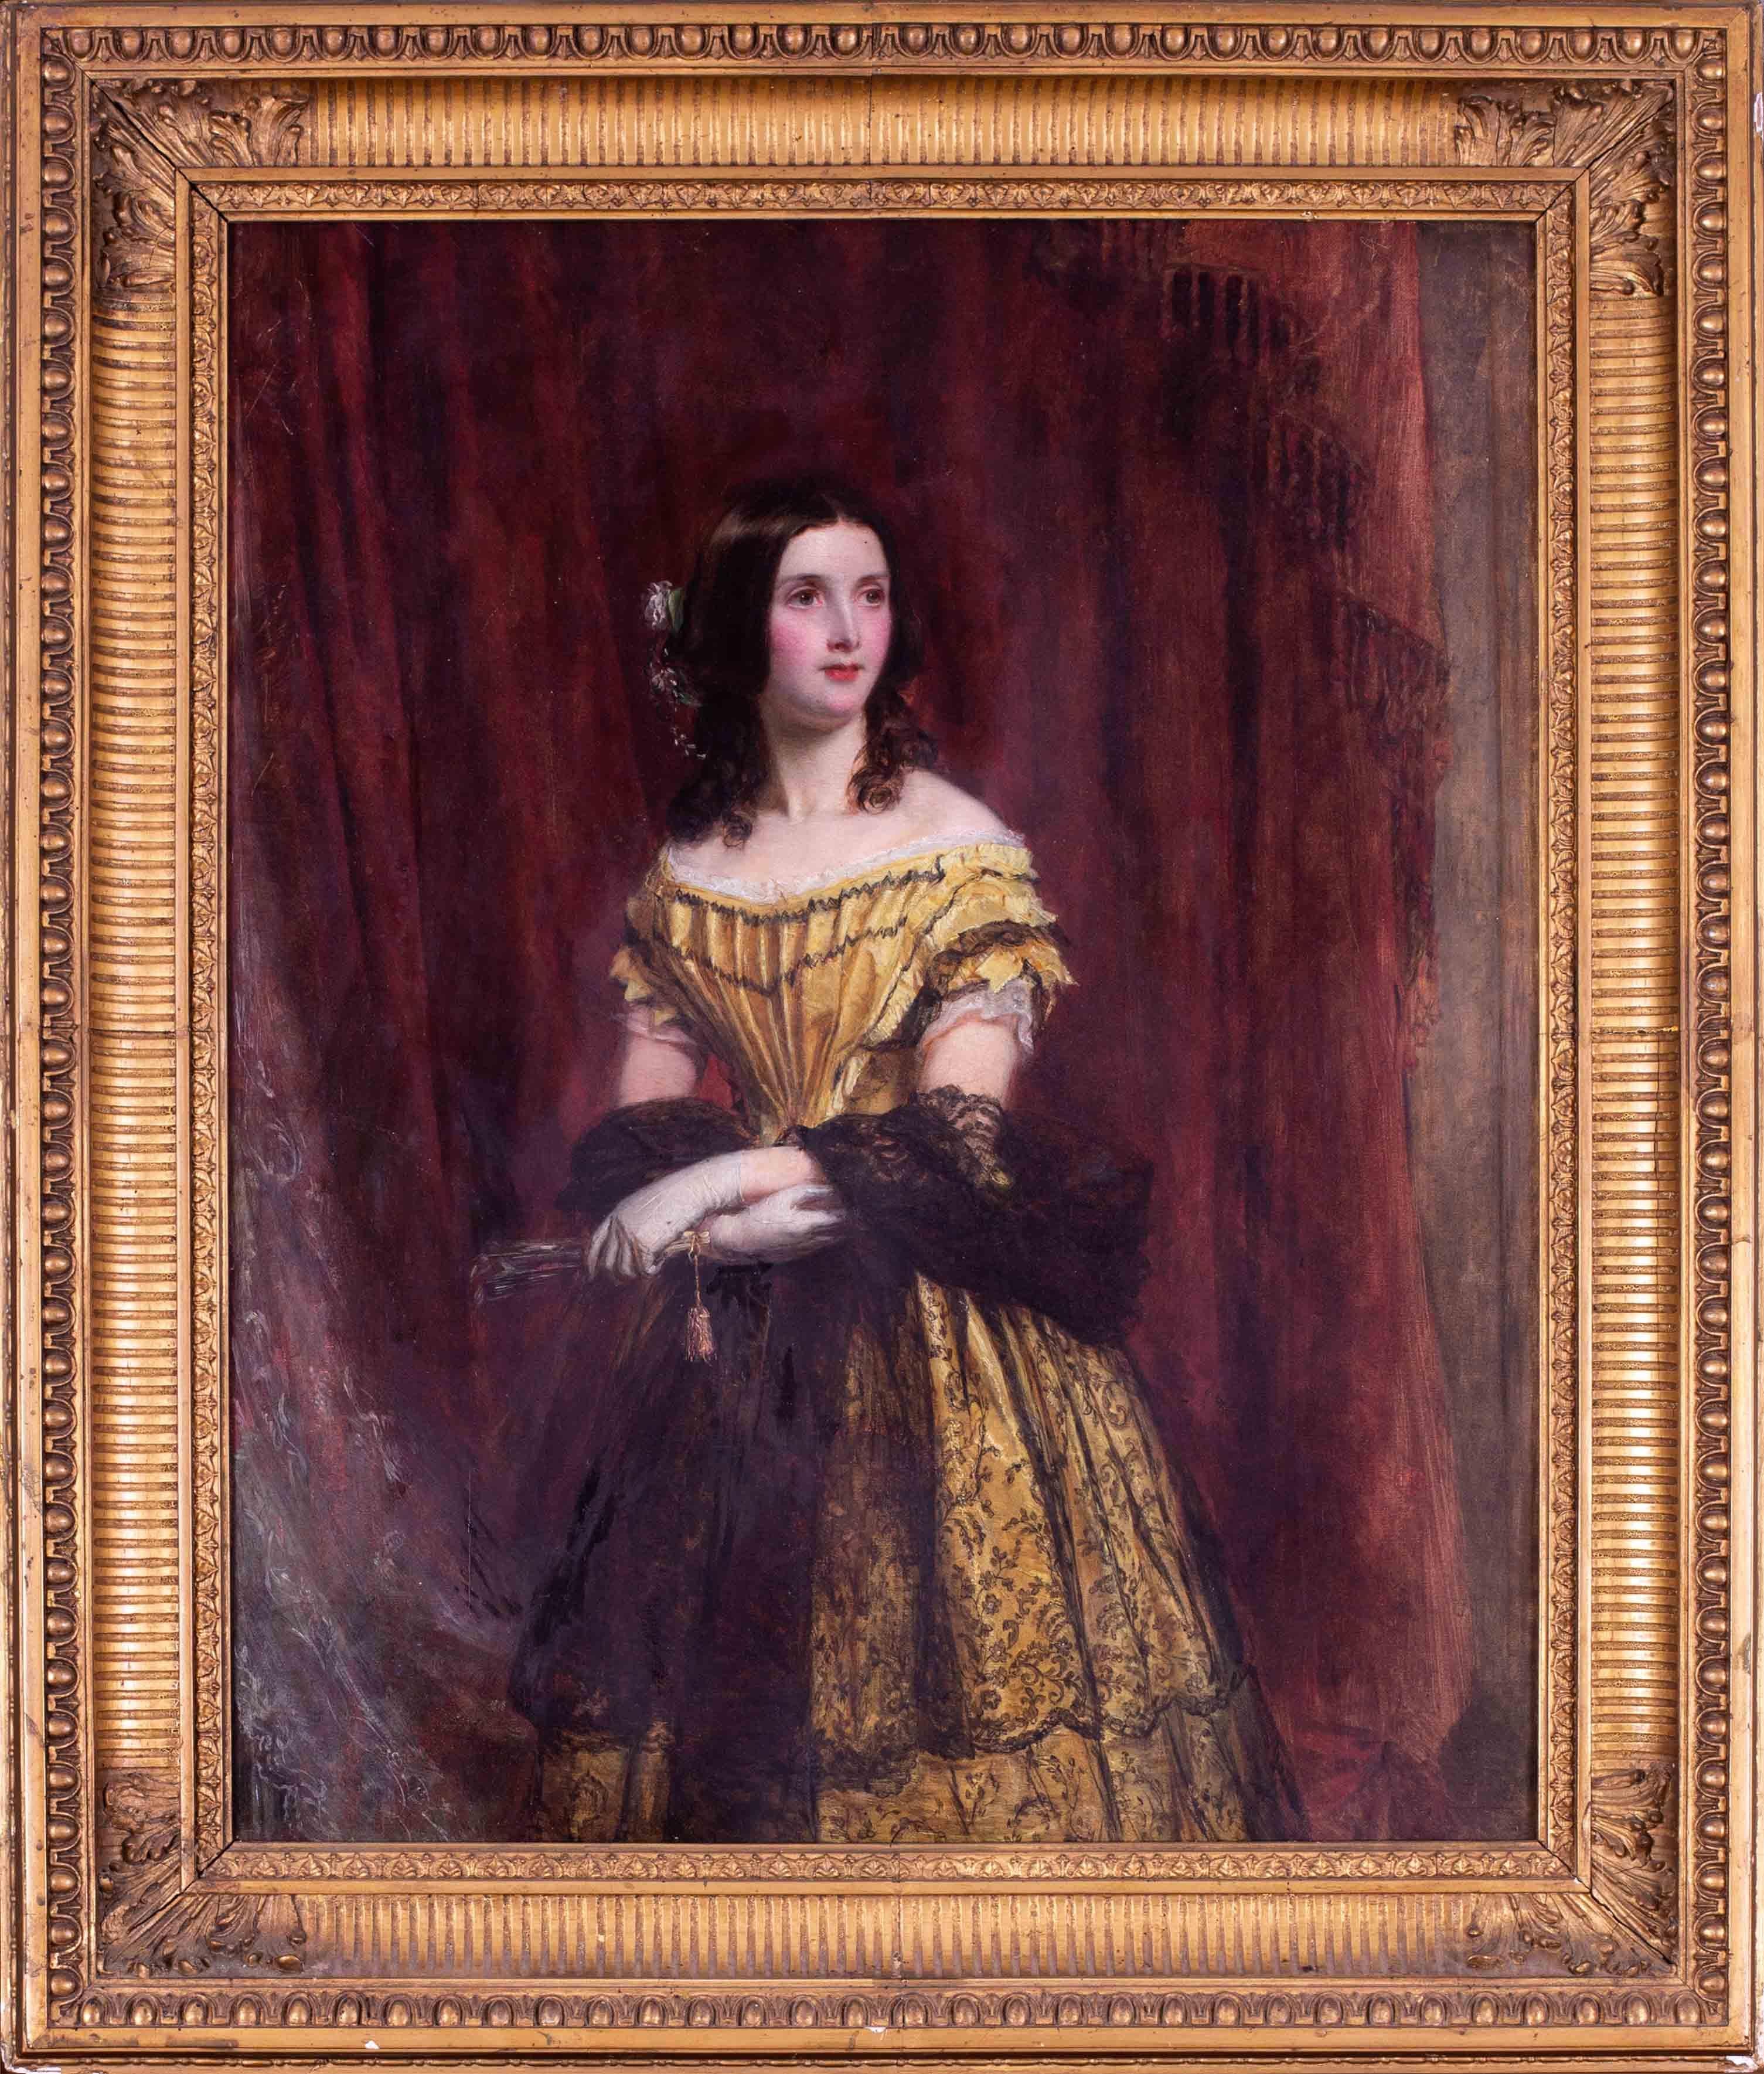 British 19th Century portrait of Miss Katie Coates by Powell Frith, 1853